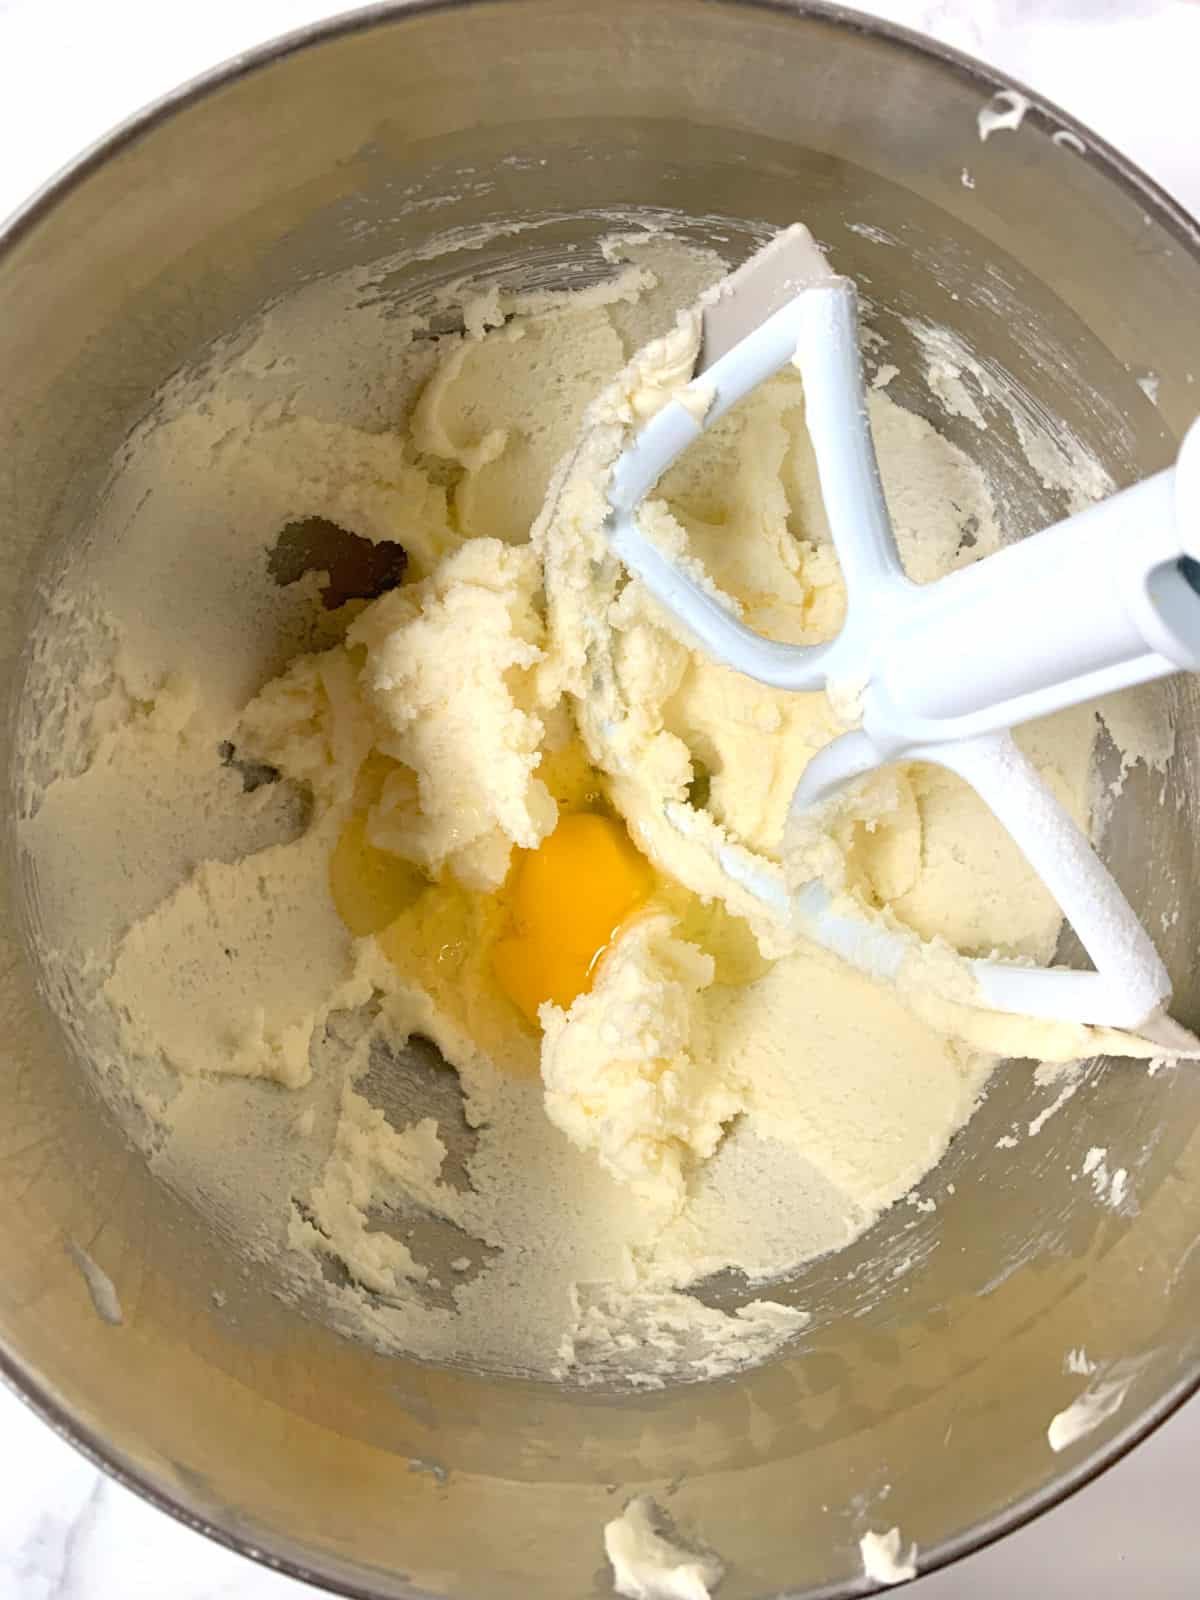 Mixing an egg into a cake batter.